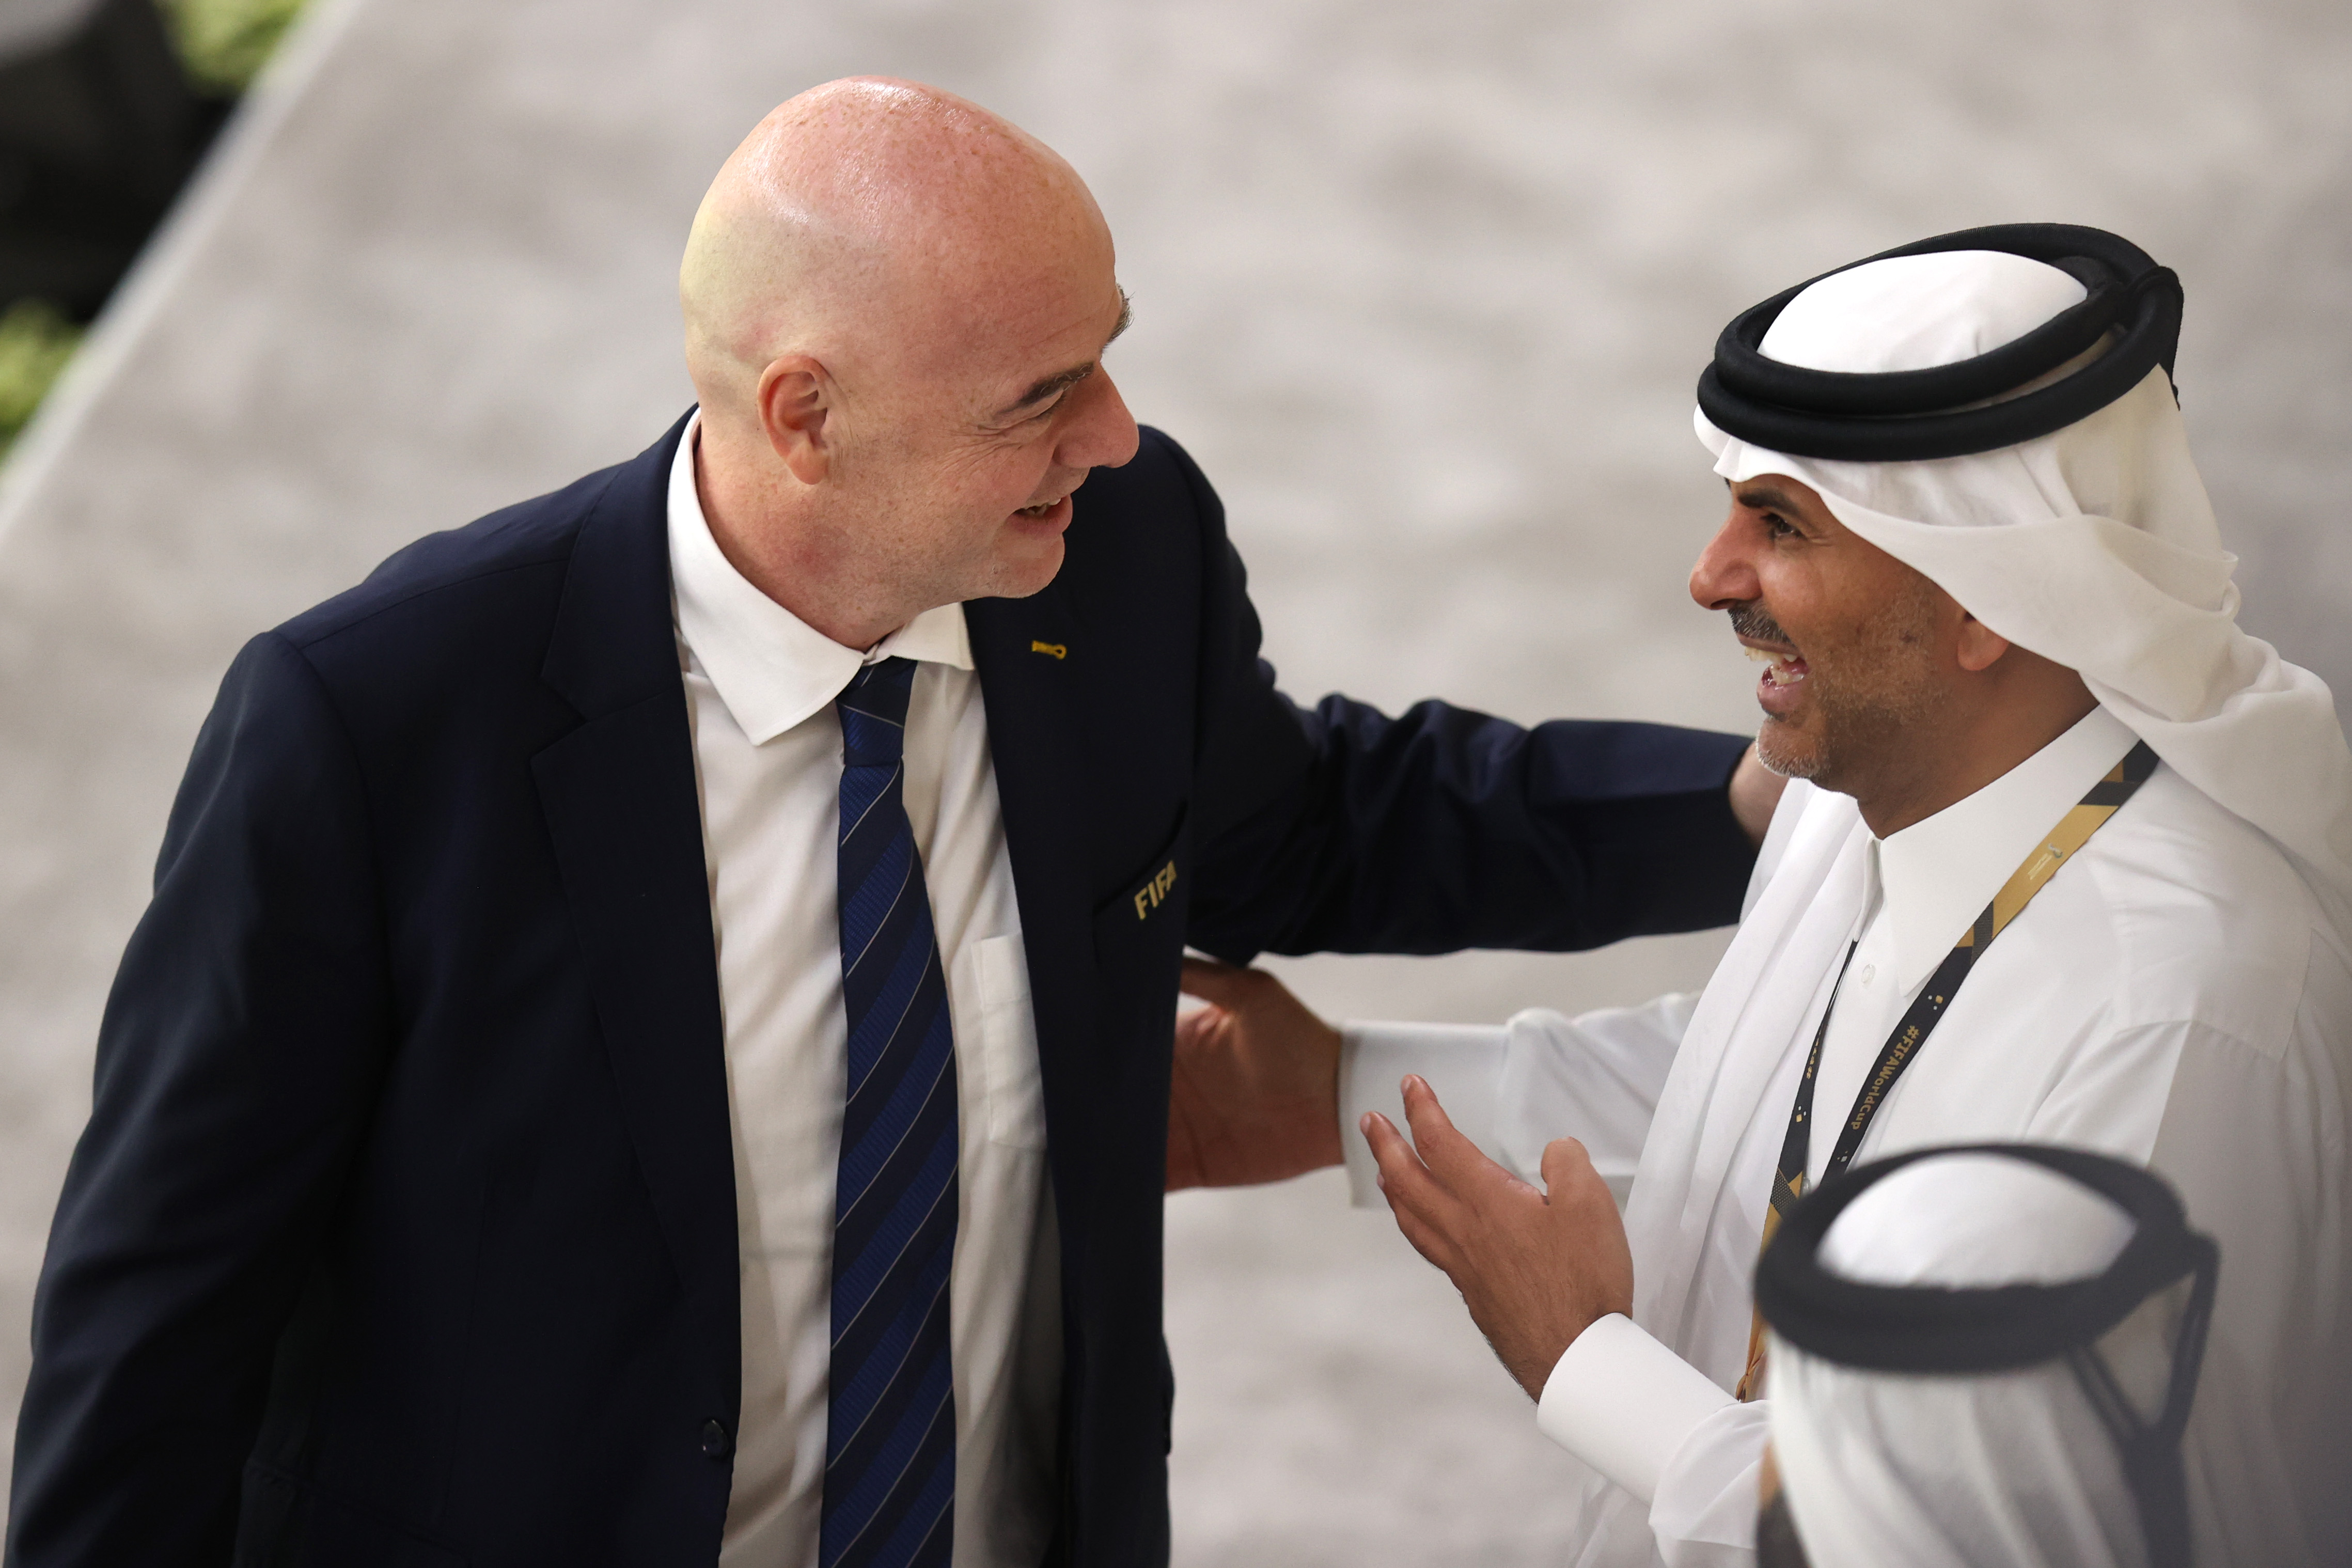 FIFA President Gianni Infantino during the opening game in Qatar 2022 between the host country and Ecuador.